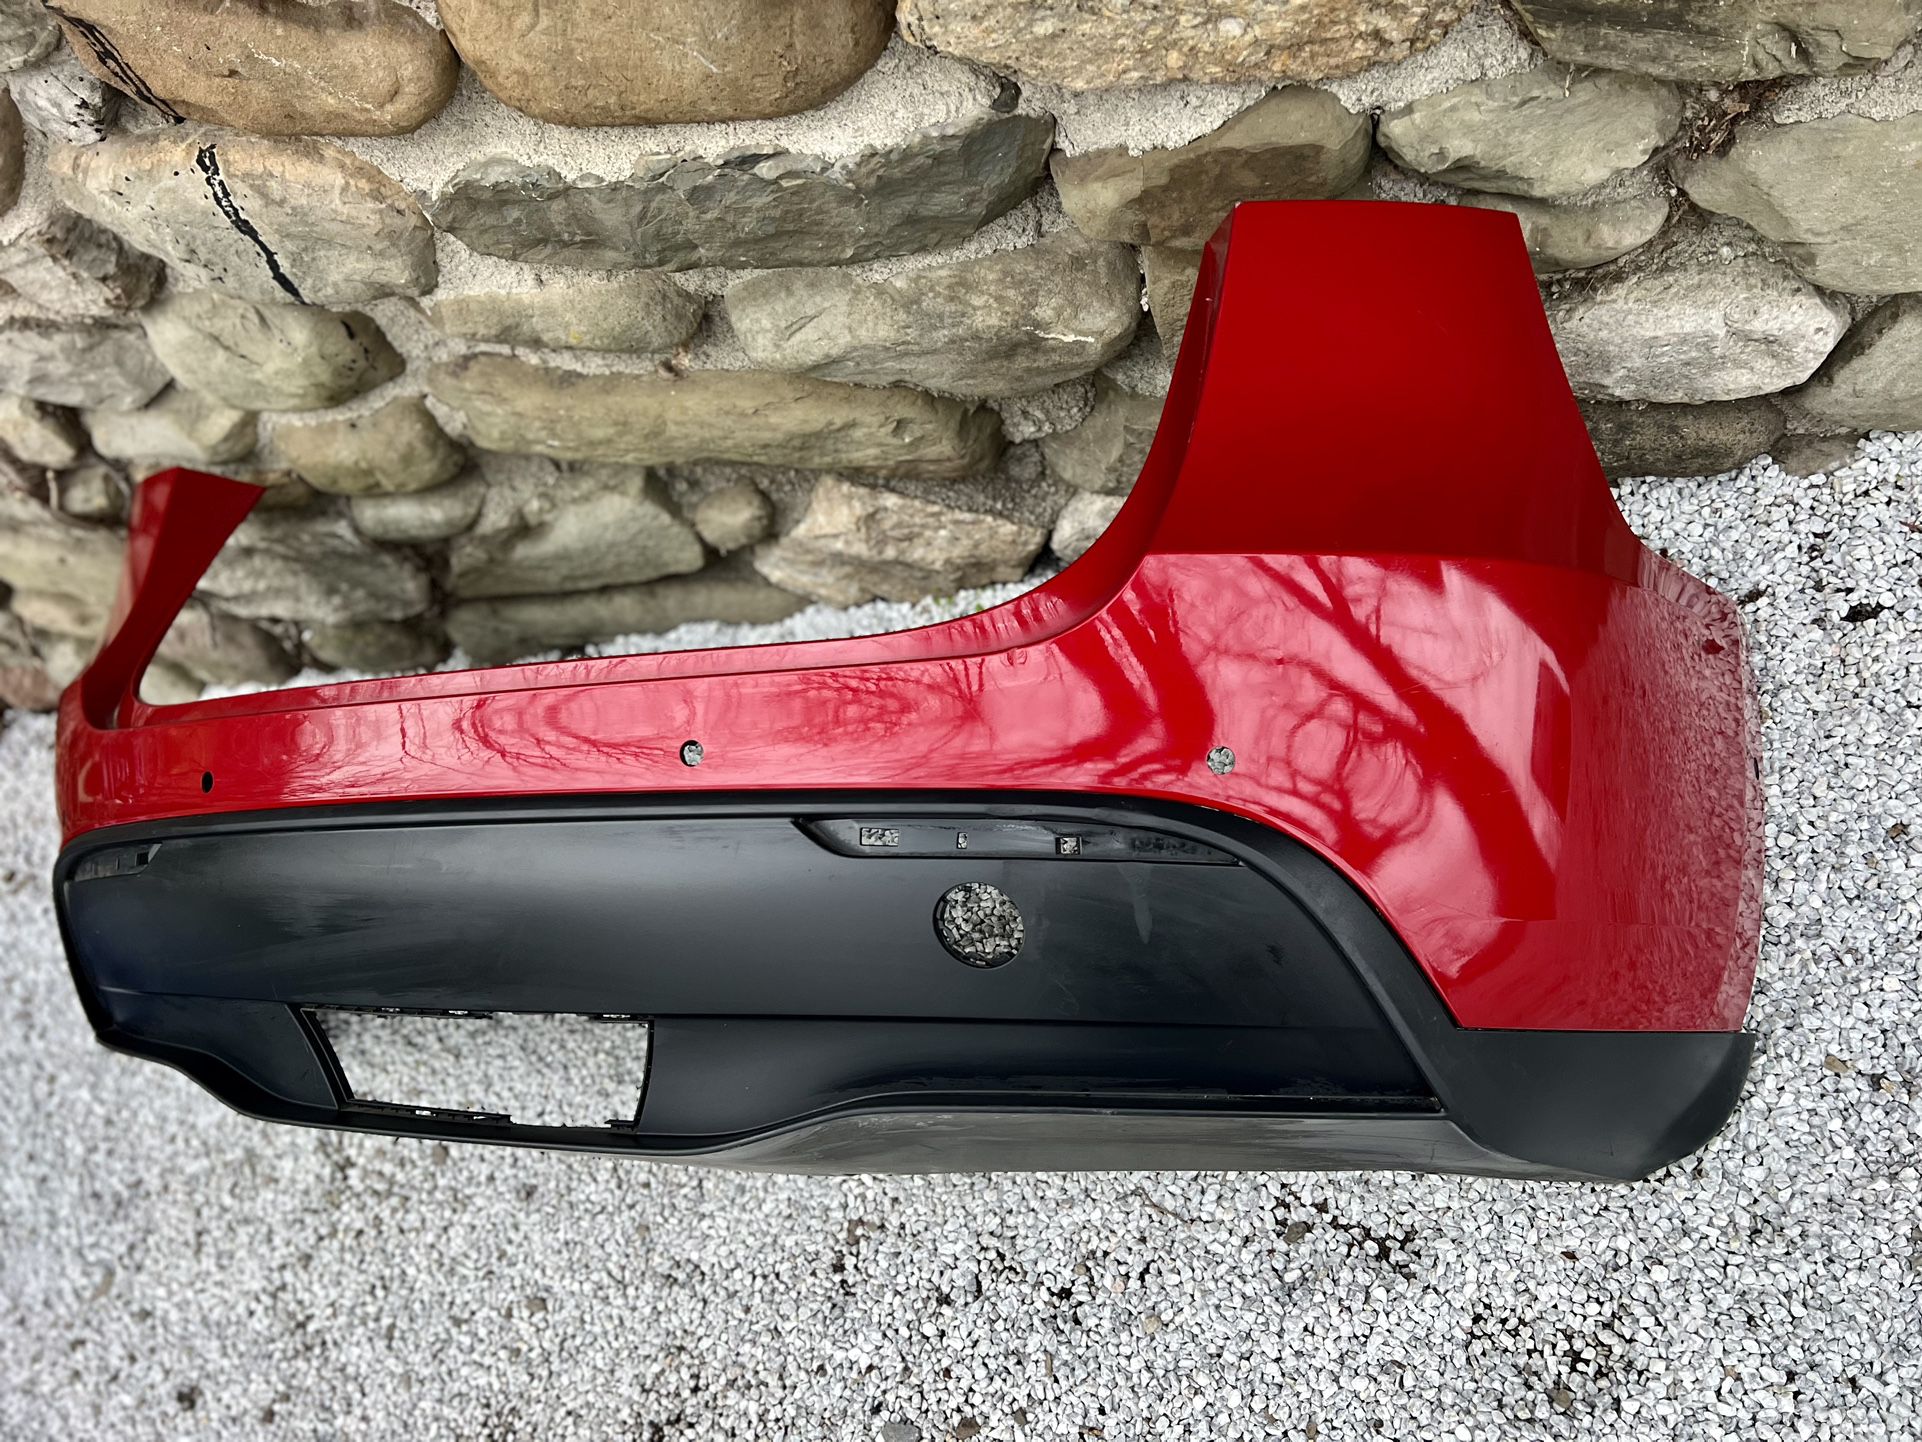 ✅ 👍 2020 2021 2022 2023 TESLA MODEL Y REAR BUMPER COVER OEM 1540123-01-A 20 21 22 23 RED PAINT + LOWER VALANCE